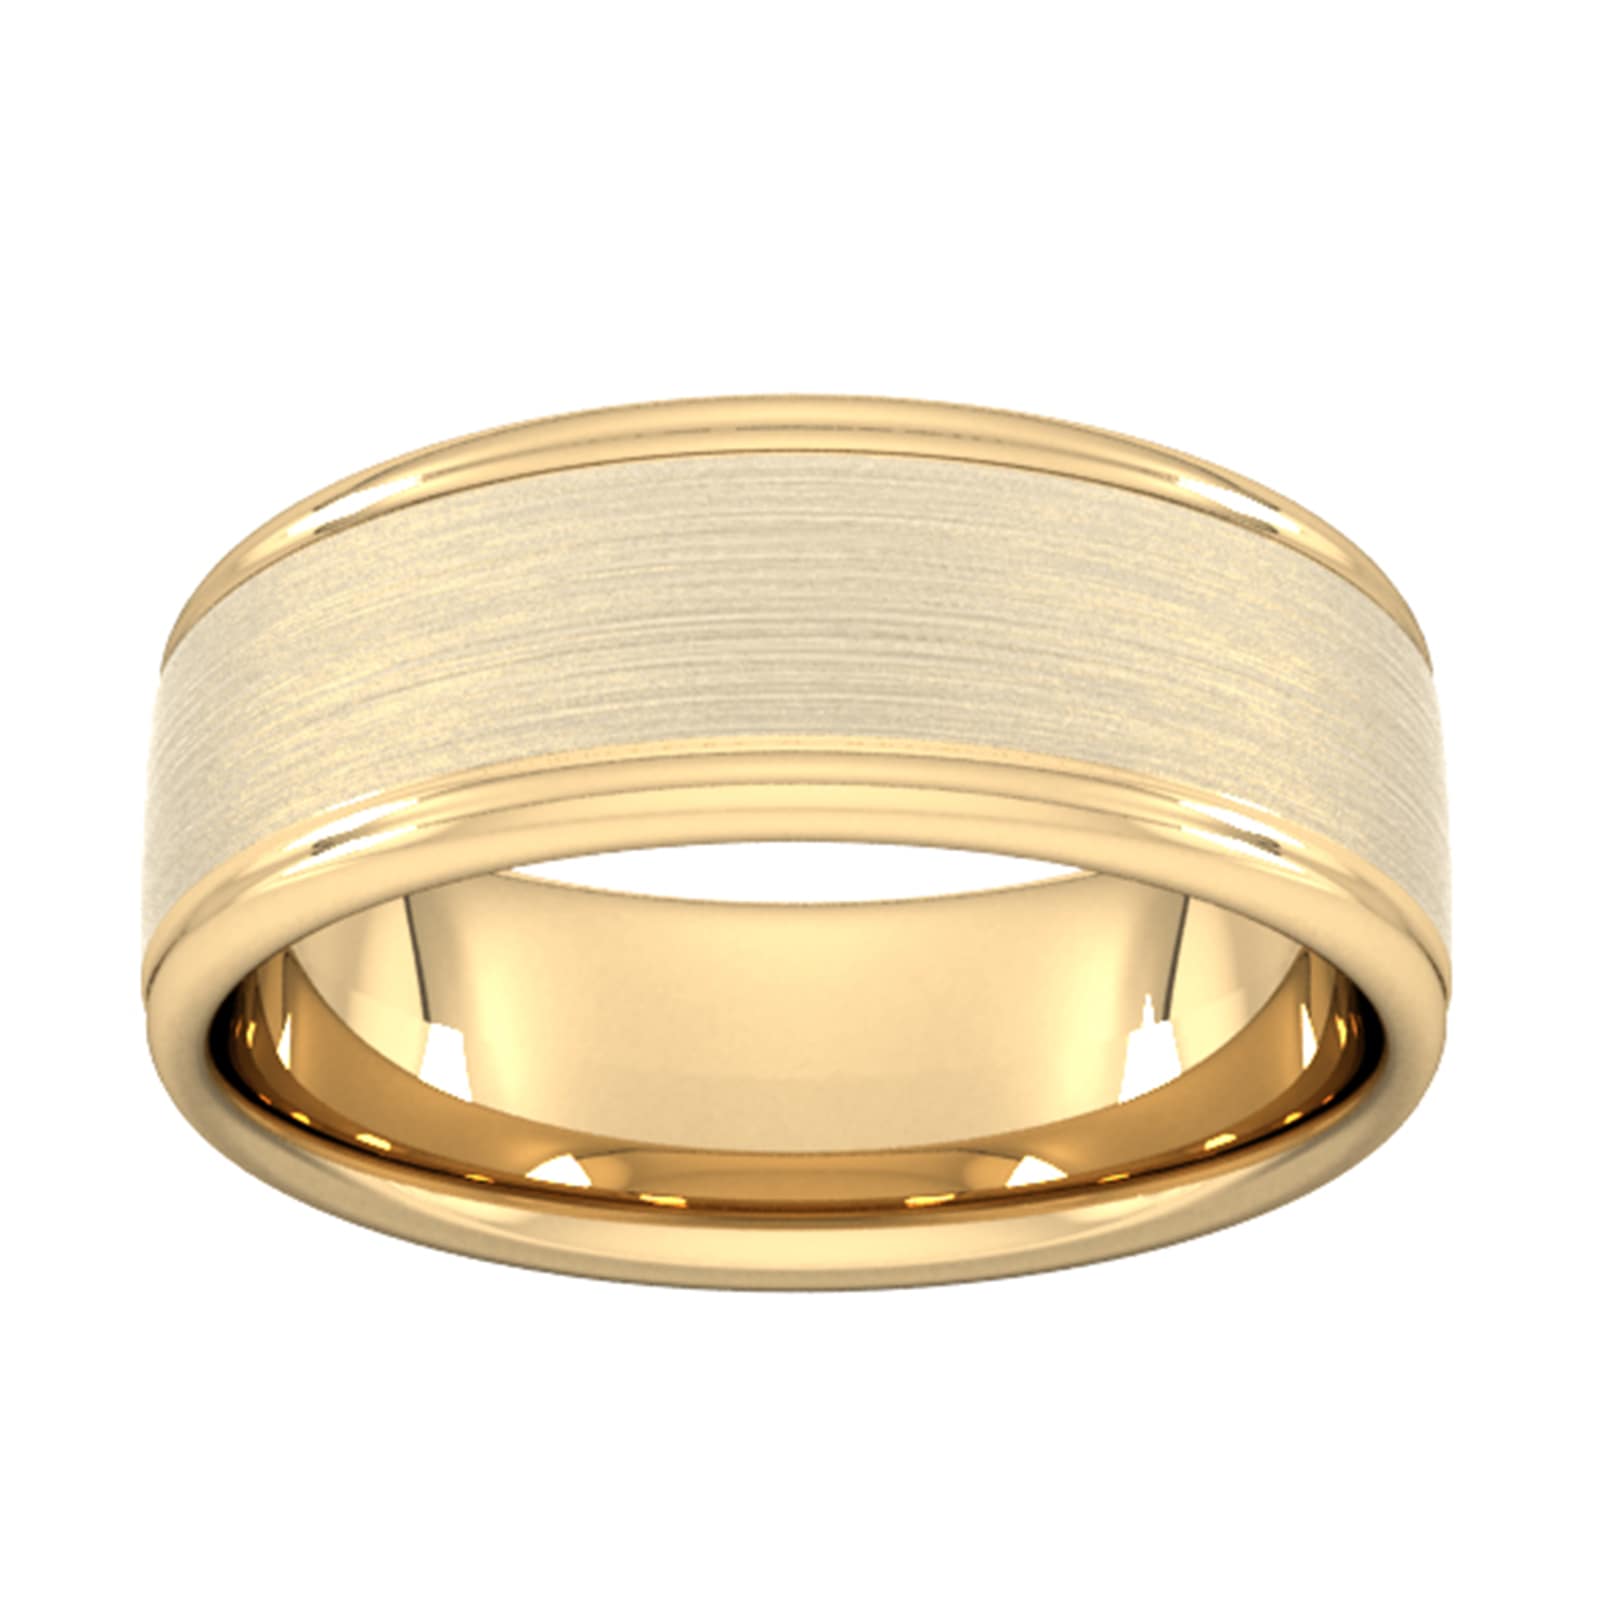 8mm D Shape Standard Matt Centre With Grooves Wedding Ring In 9 Carat Yellow Gold - Ring Size Z